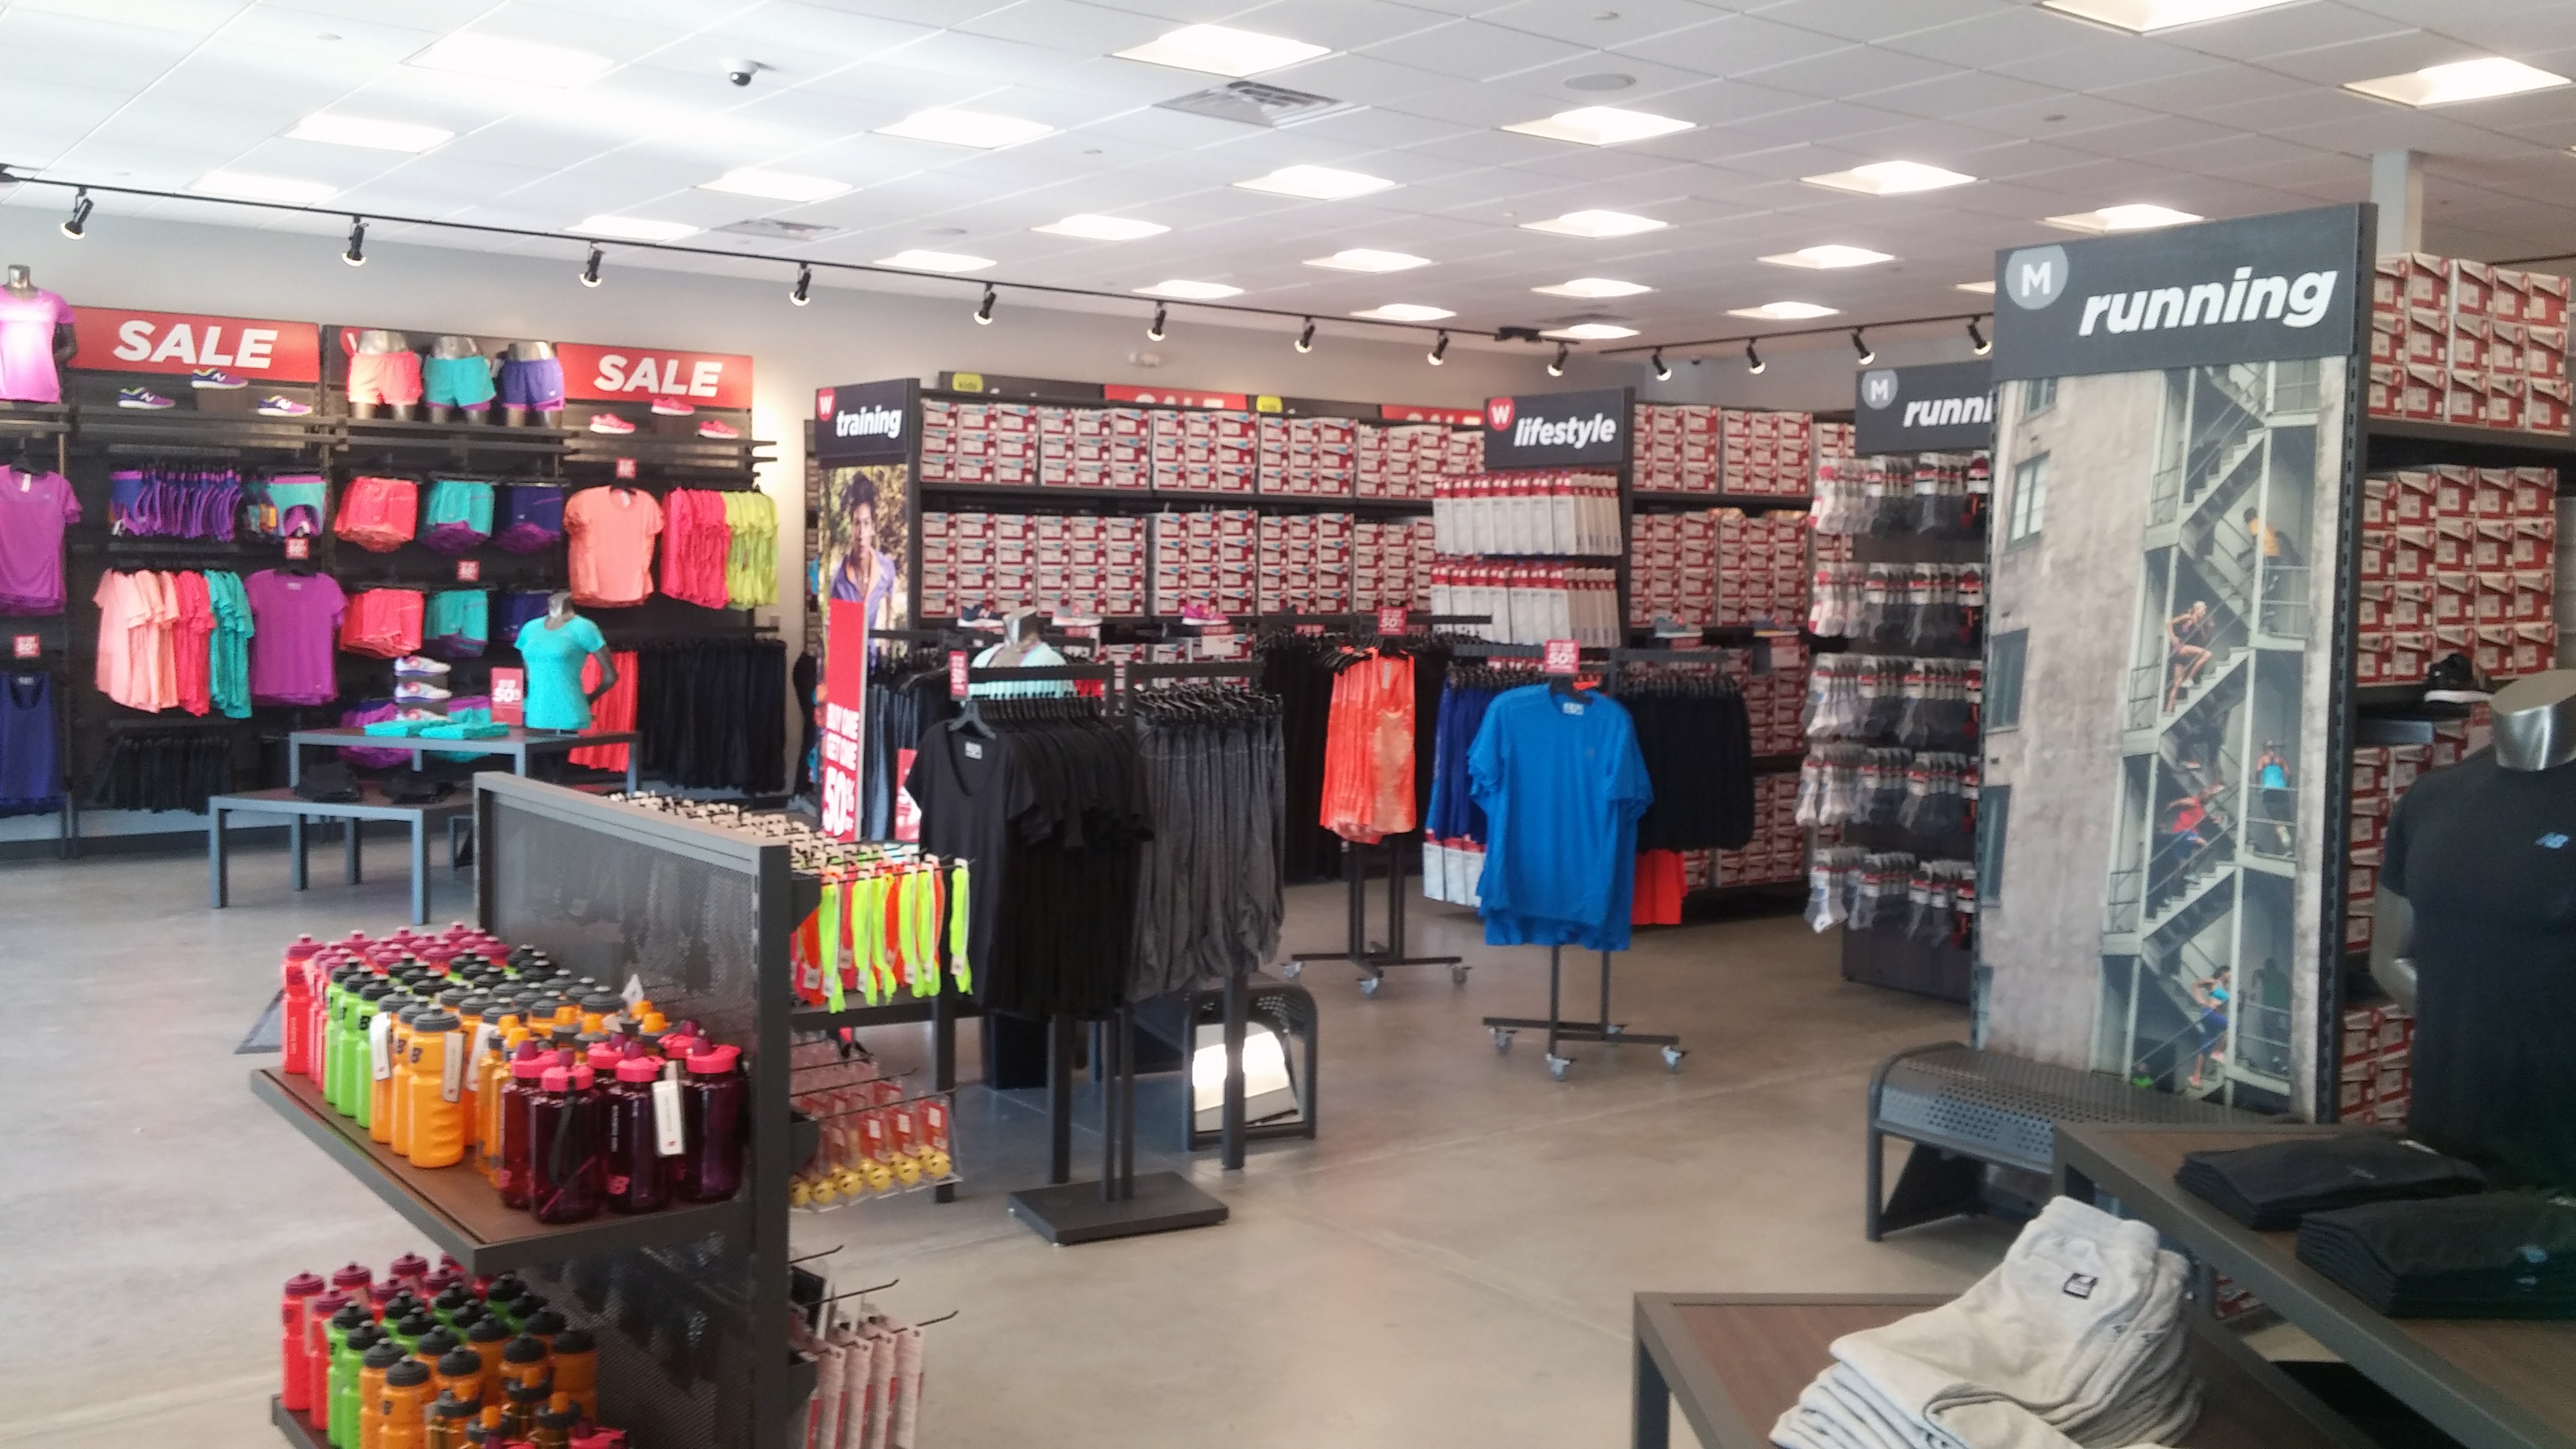 new balance factory outlet usa